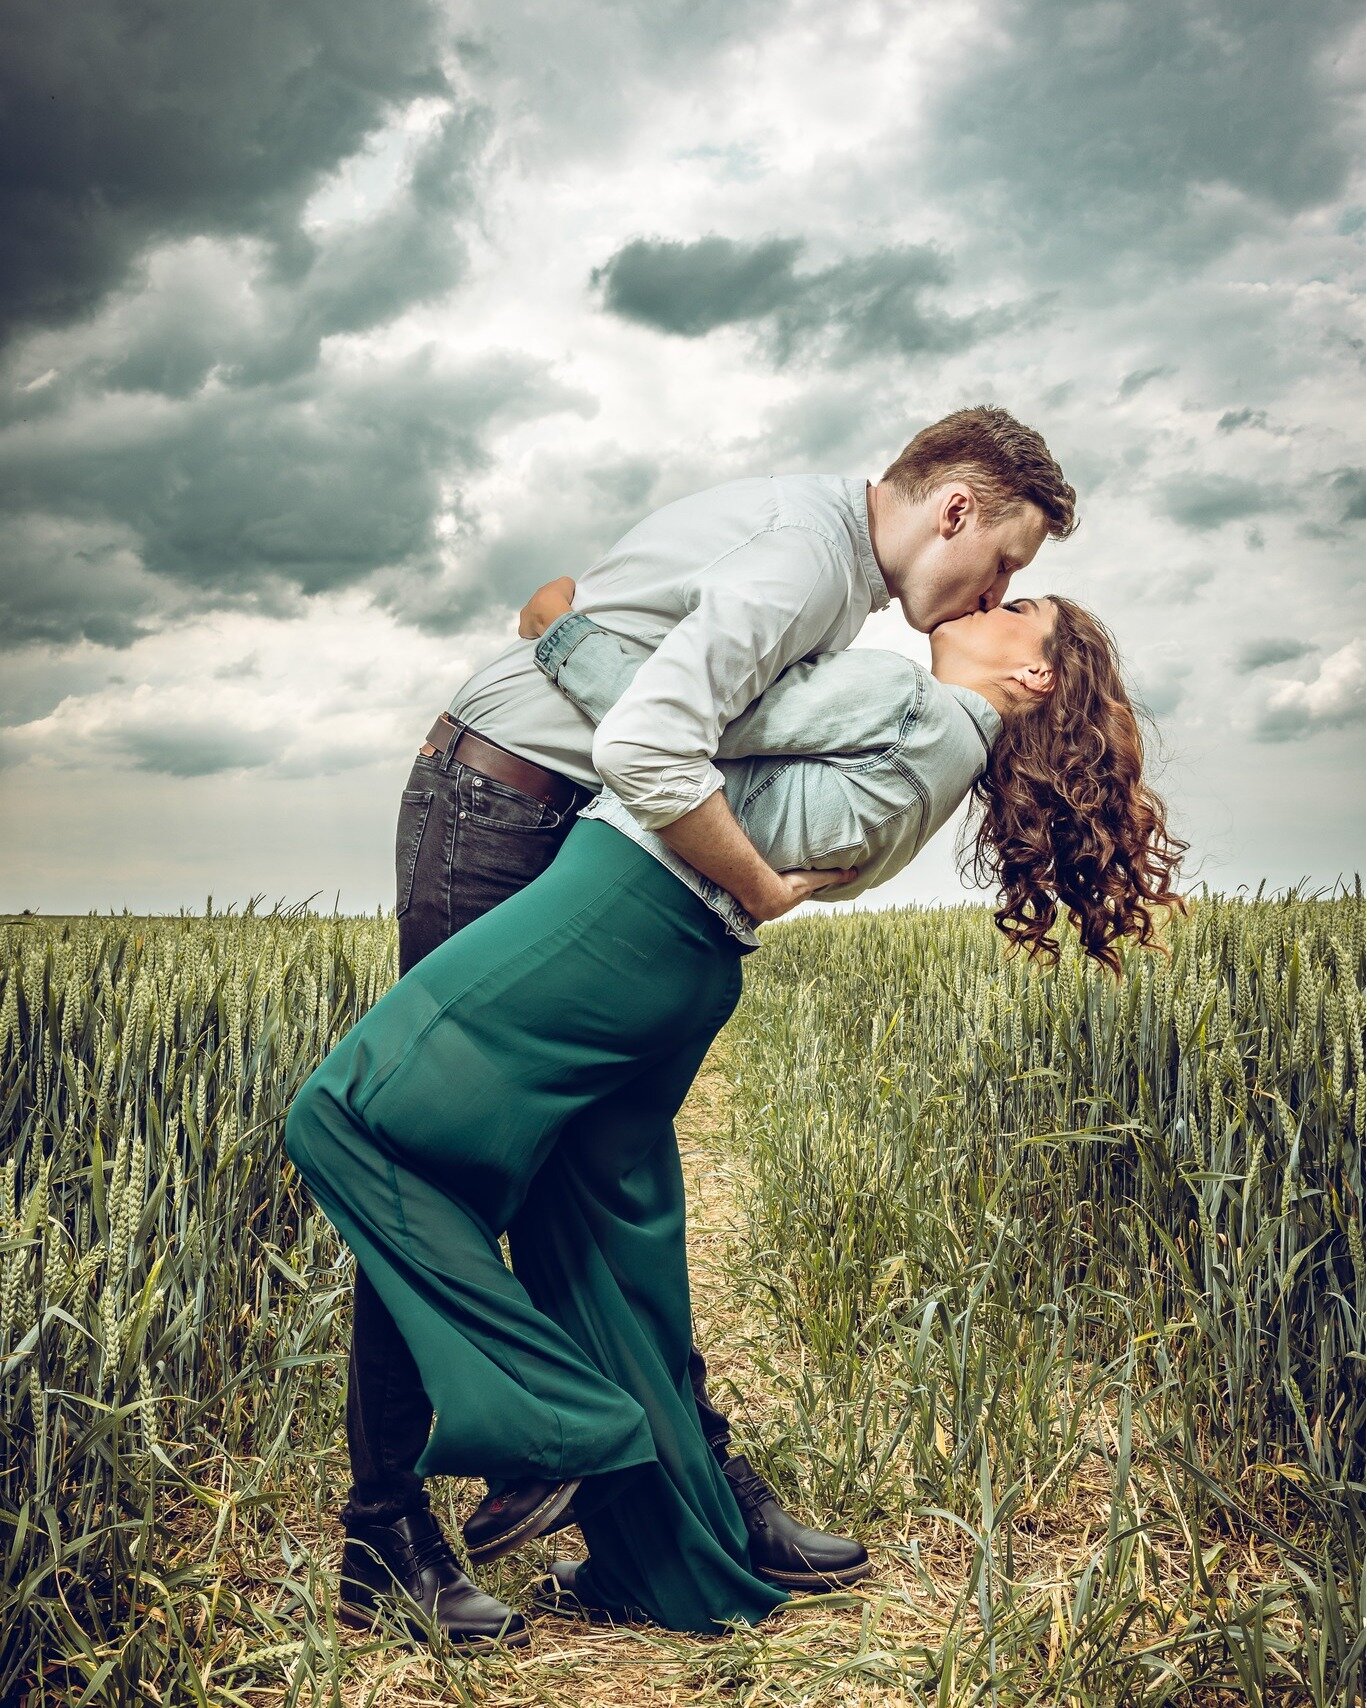 Seraya &amp; Ellis on their free pre shoot.
We went to some fields and woods right where it all began: where they shared their first kiss...